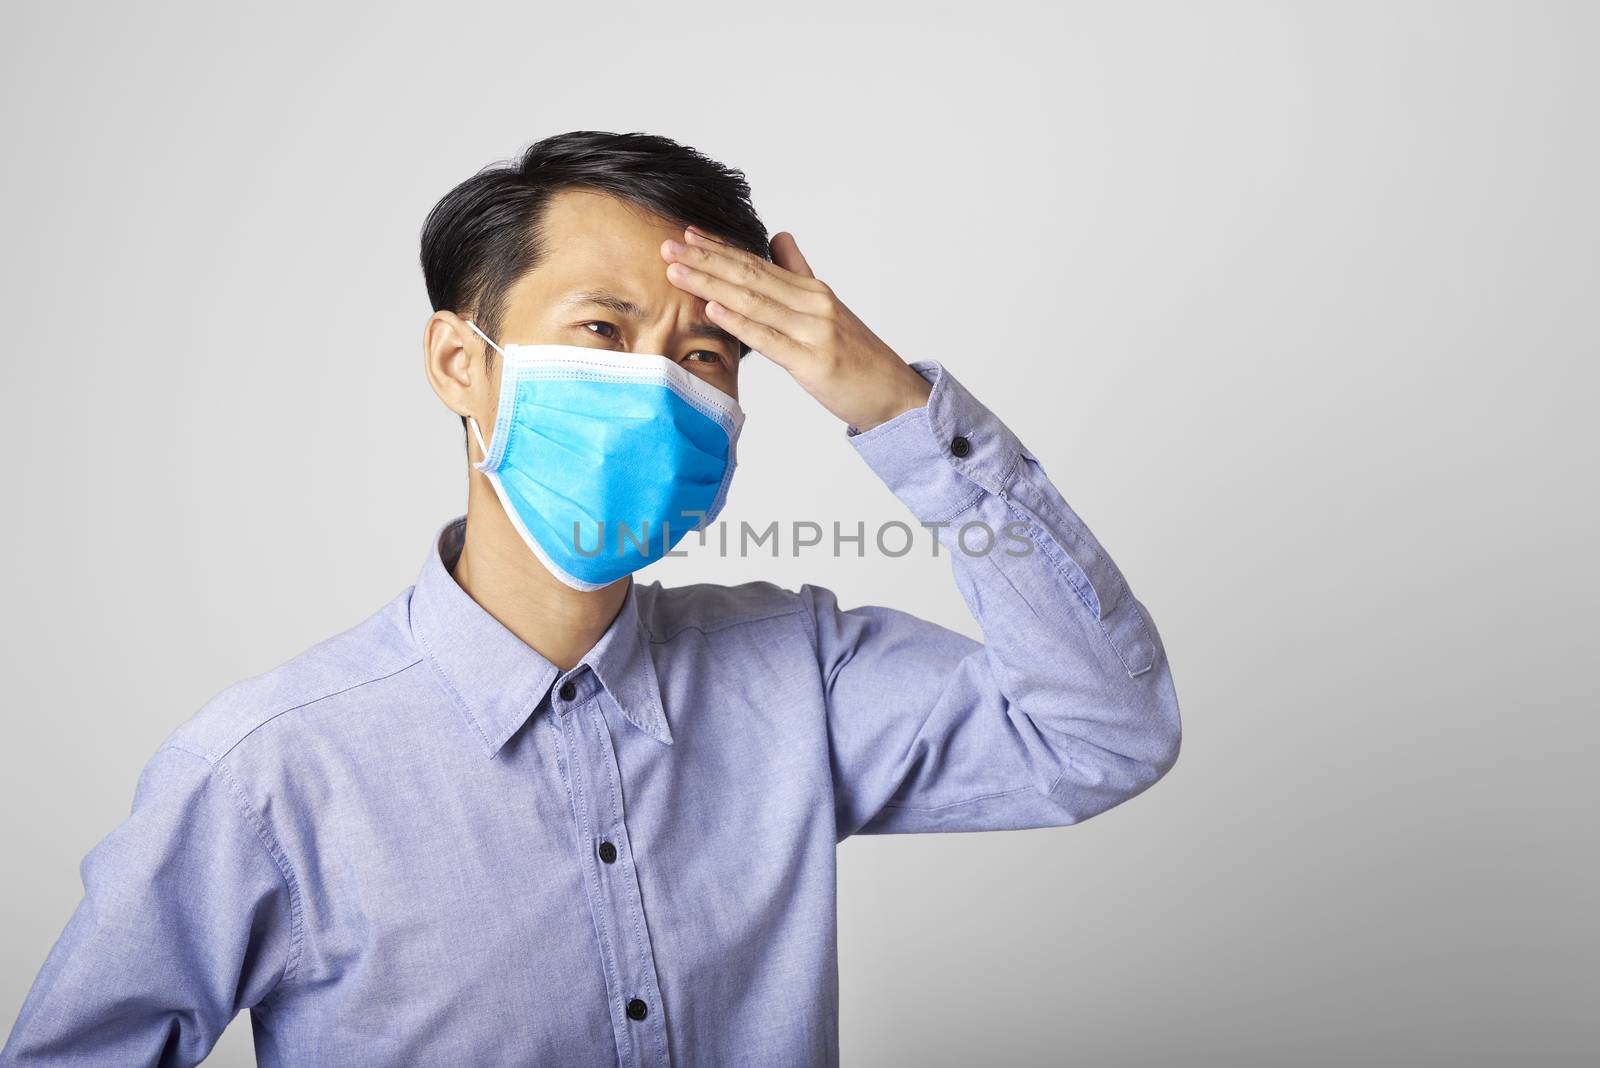 adult asia man wearing surgical mask covering mouth and nose with illness symptom flu.